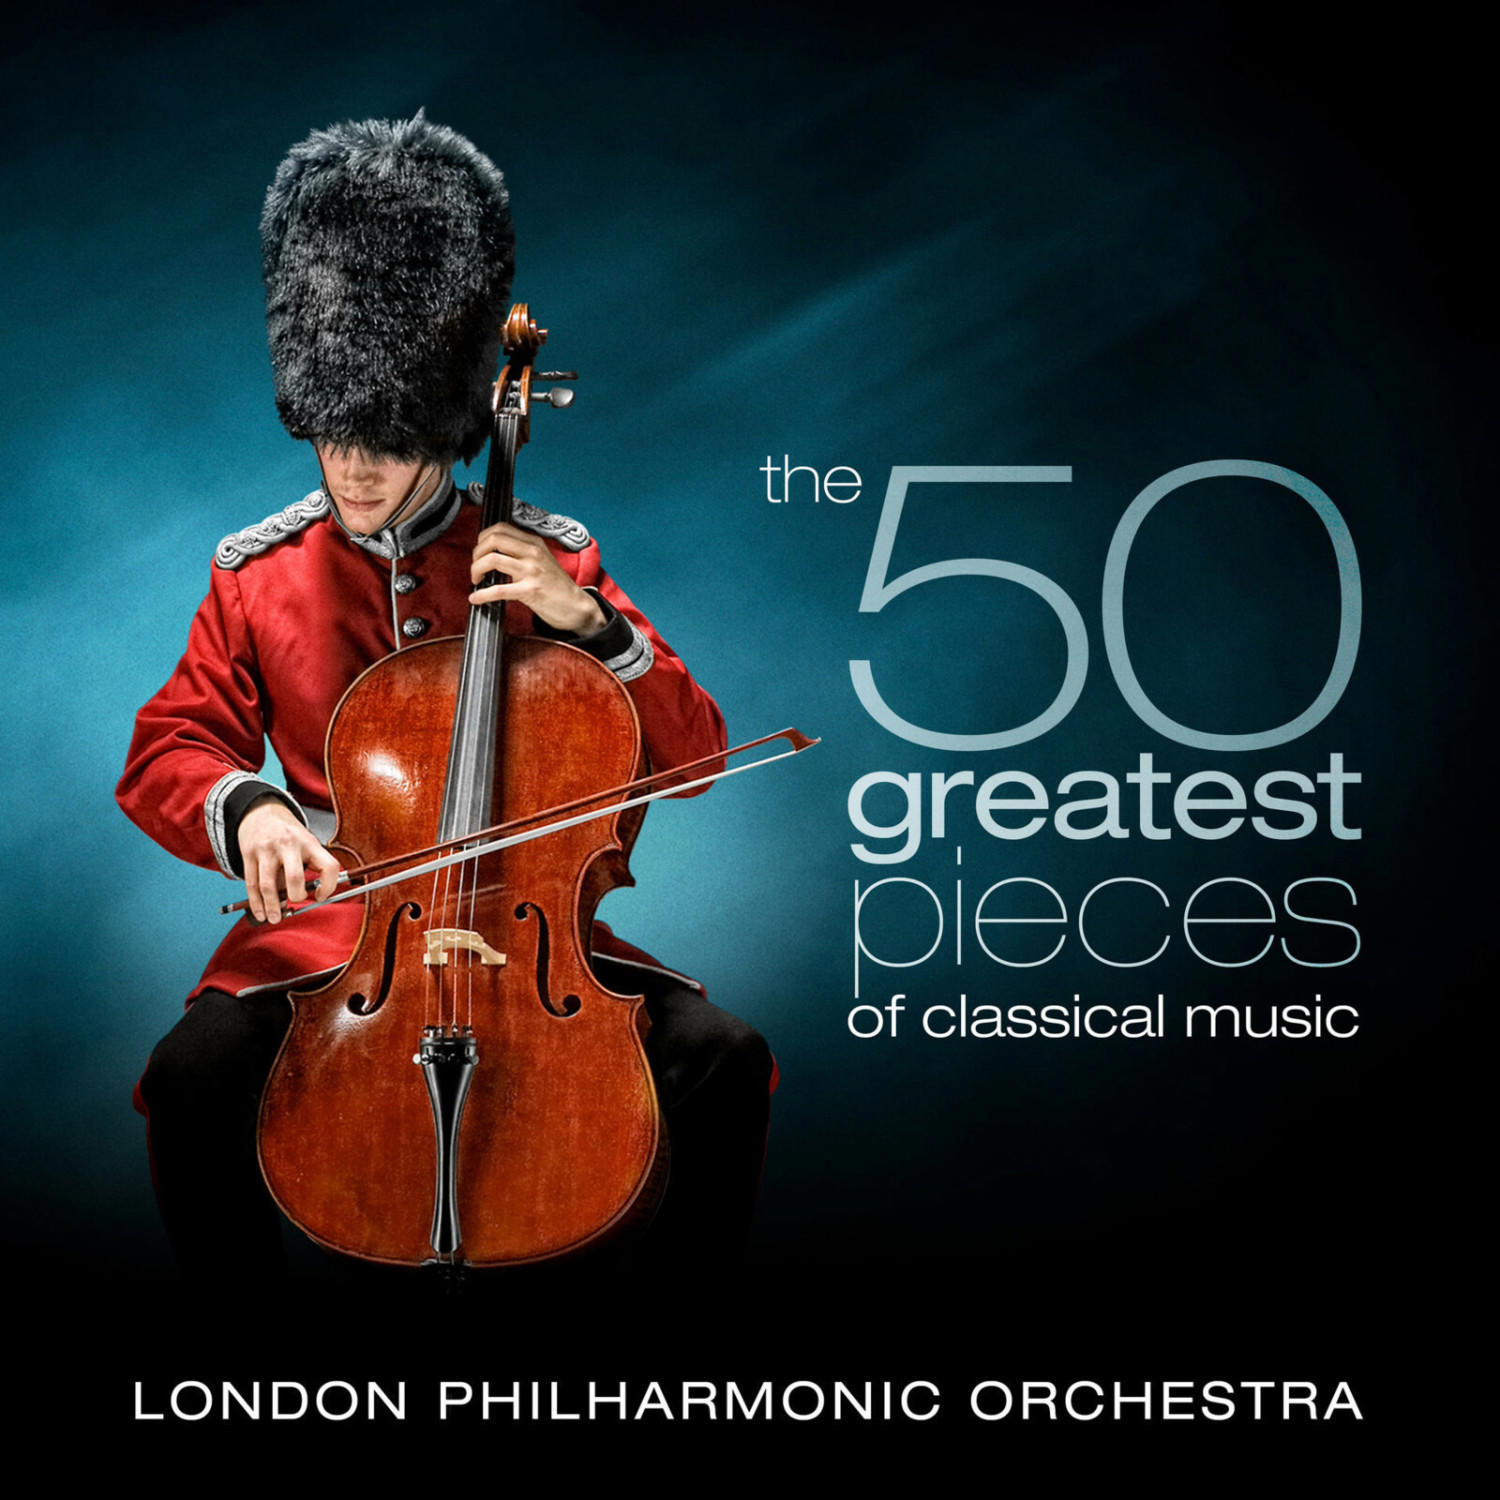 David Parry, The London Philharmonic Orchestra - The 50 Greatest Pieces of Classical Music (CD)